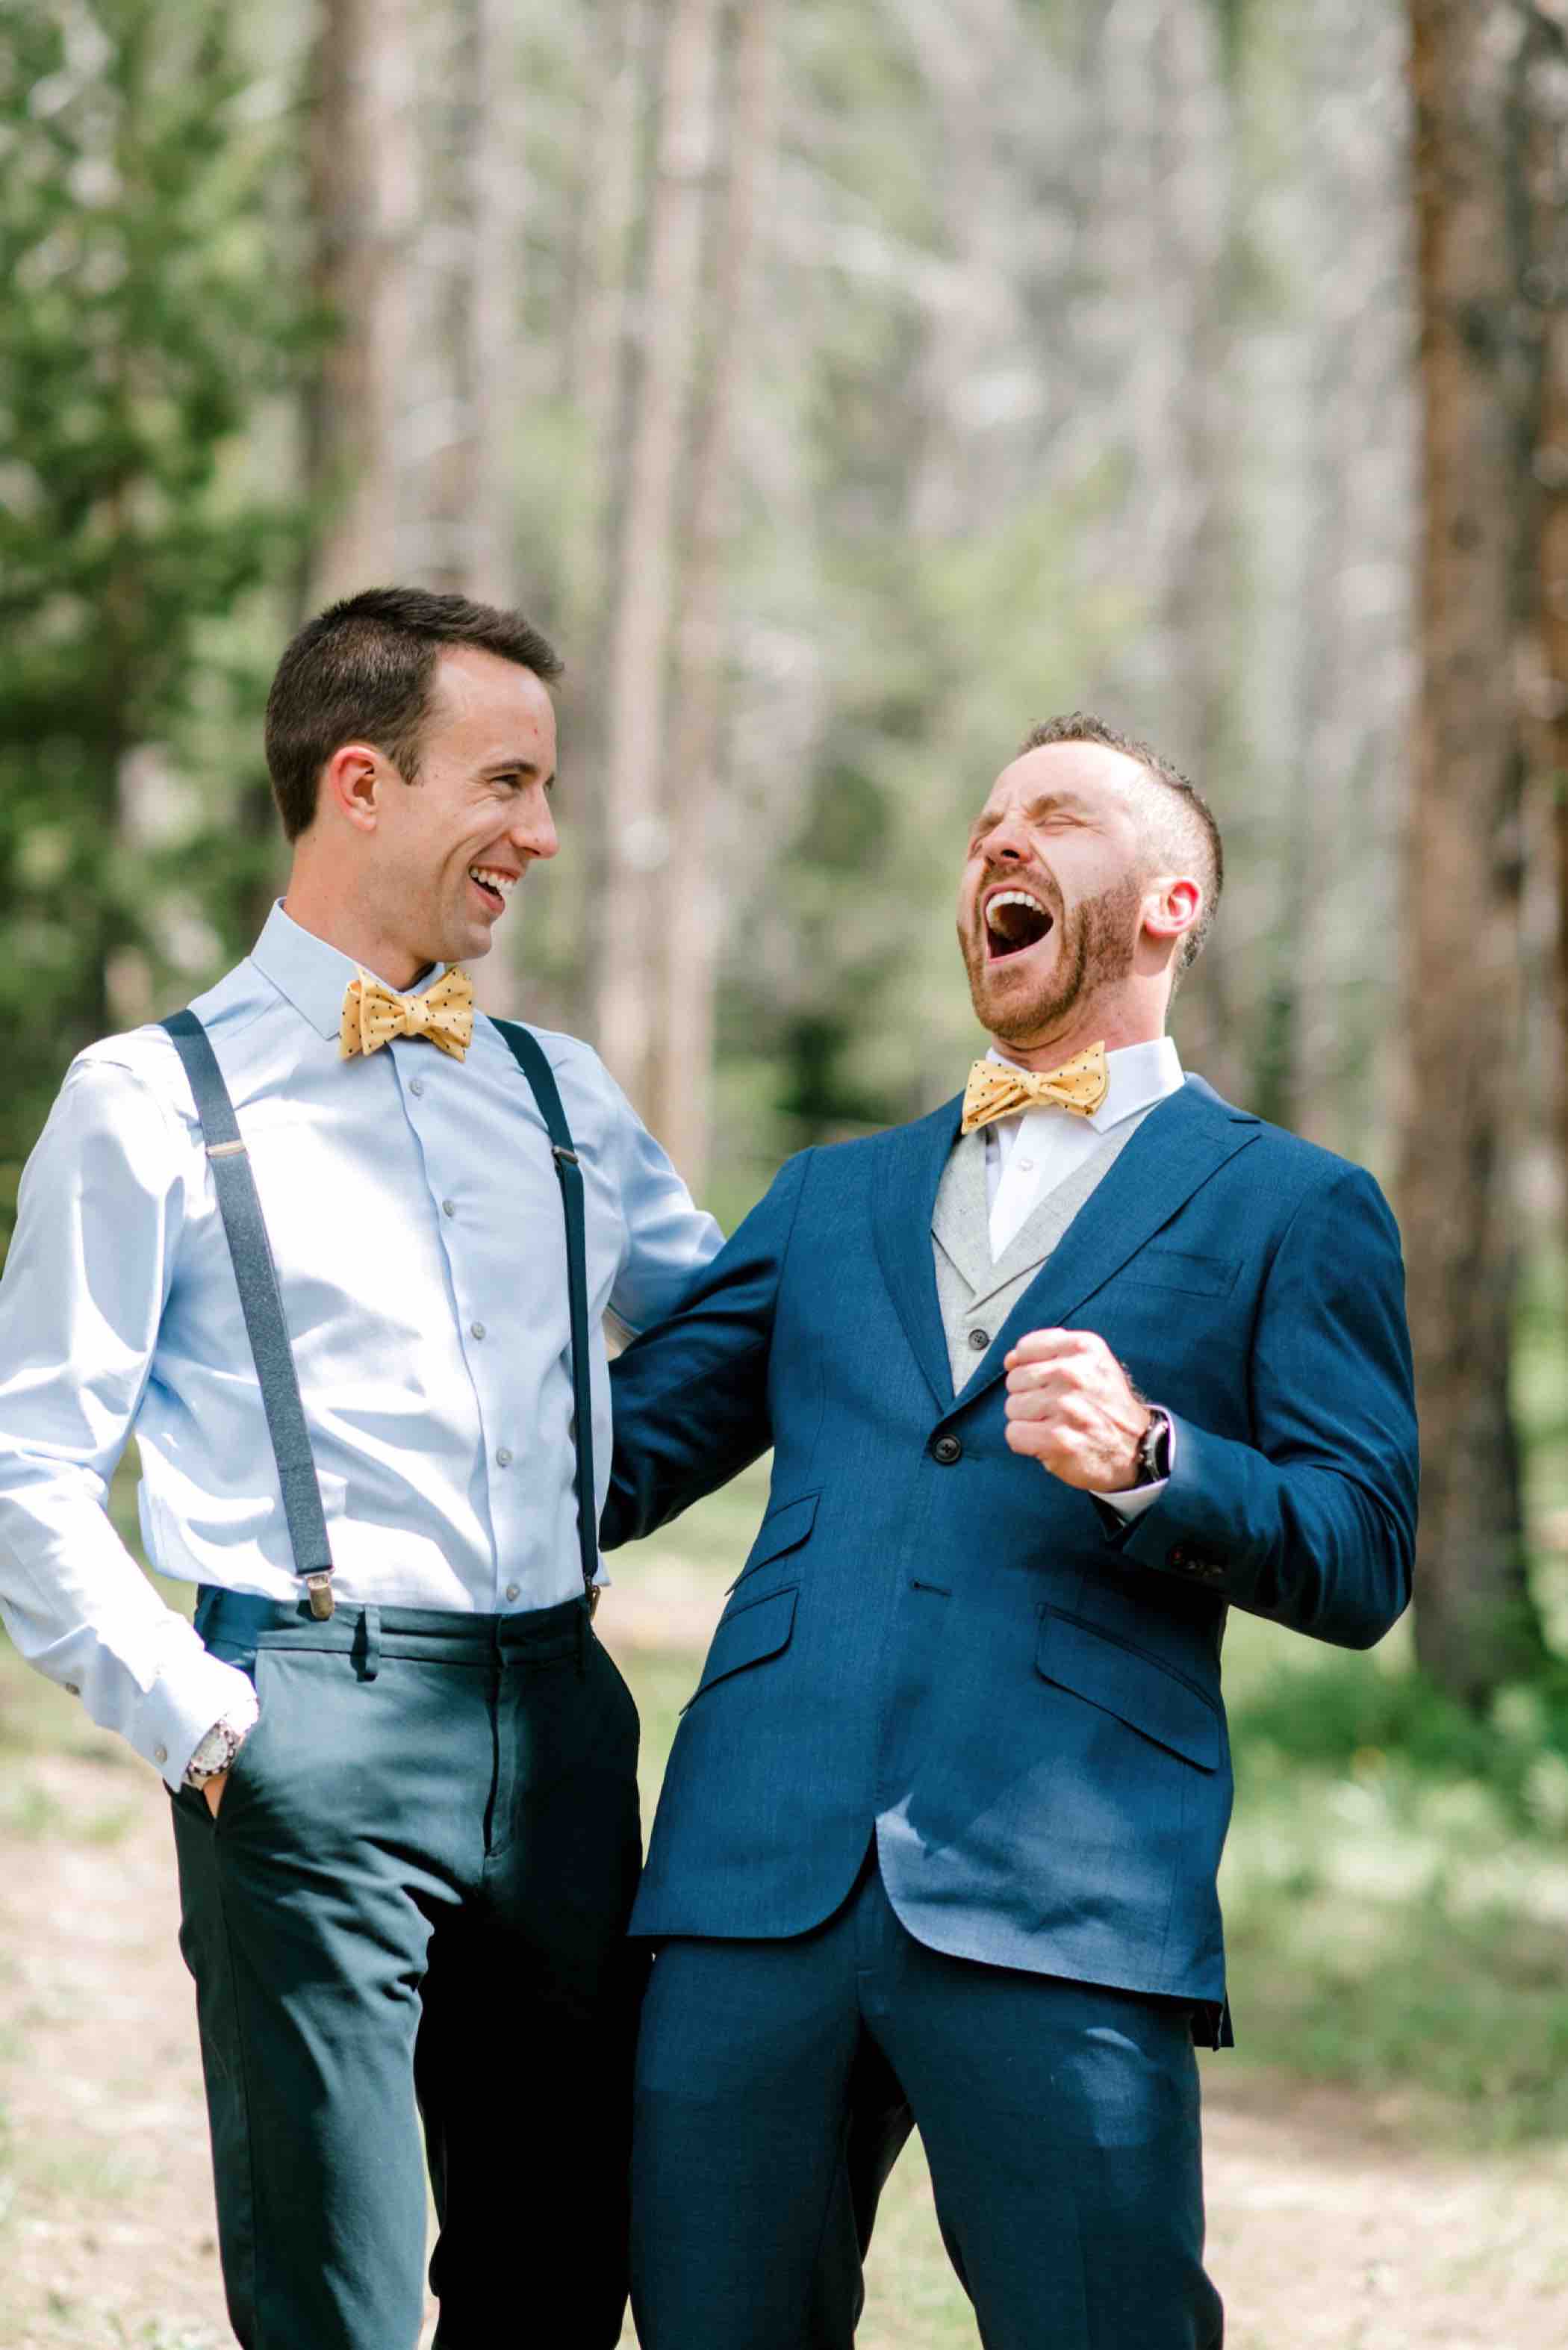 Groomsmen photos outside Piney River Ranch in Vail in the Colorado Rocky Mountains. Photo by Ali and Garrett, Romantic, Adventurous, Nostalgic Wedding Photographers.